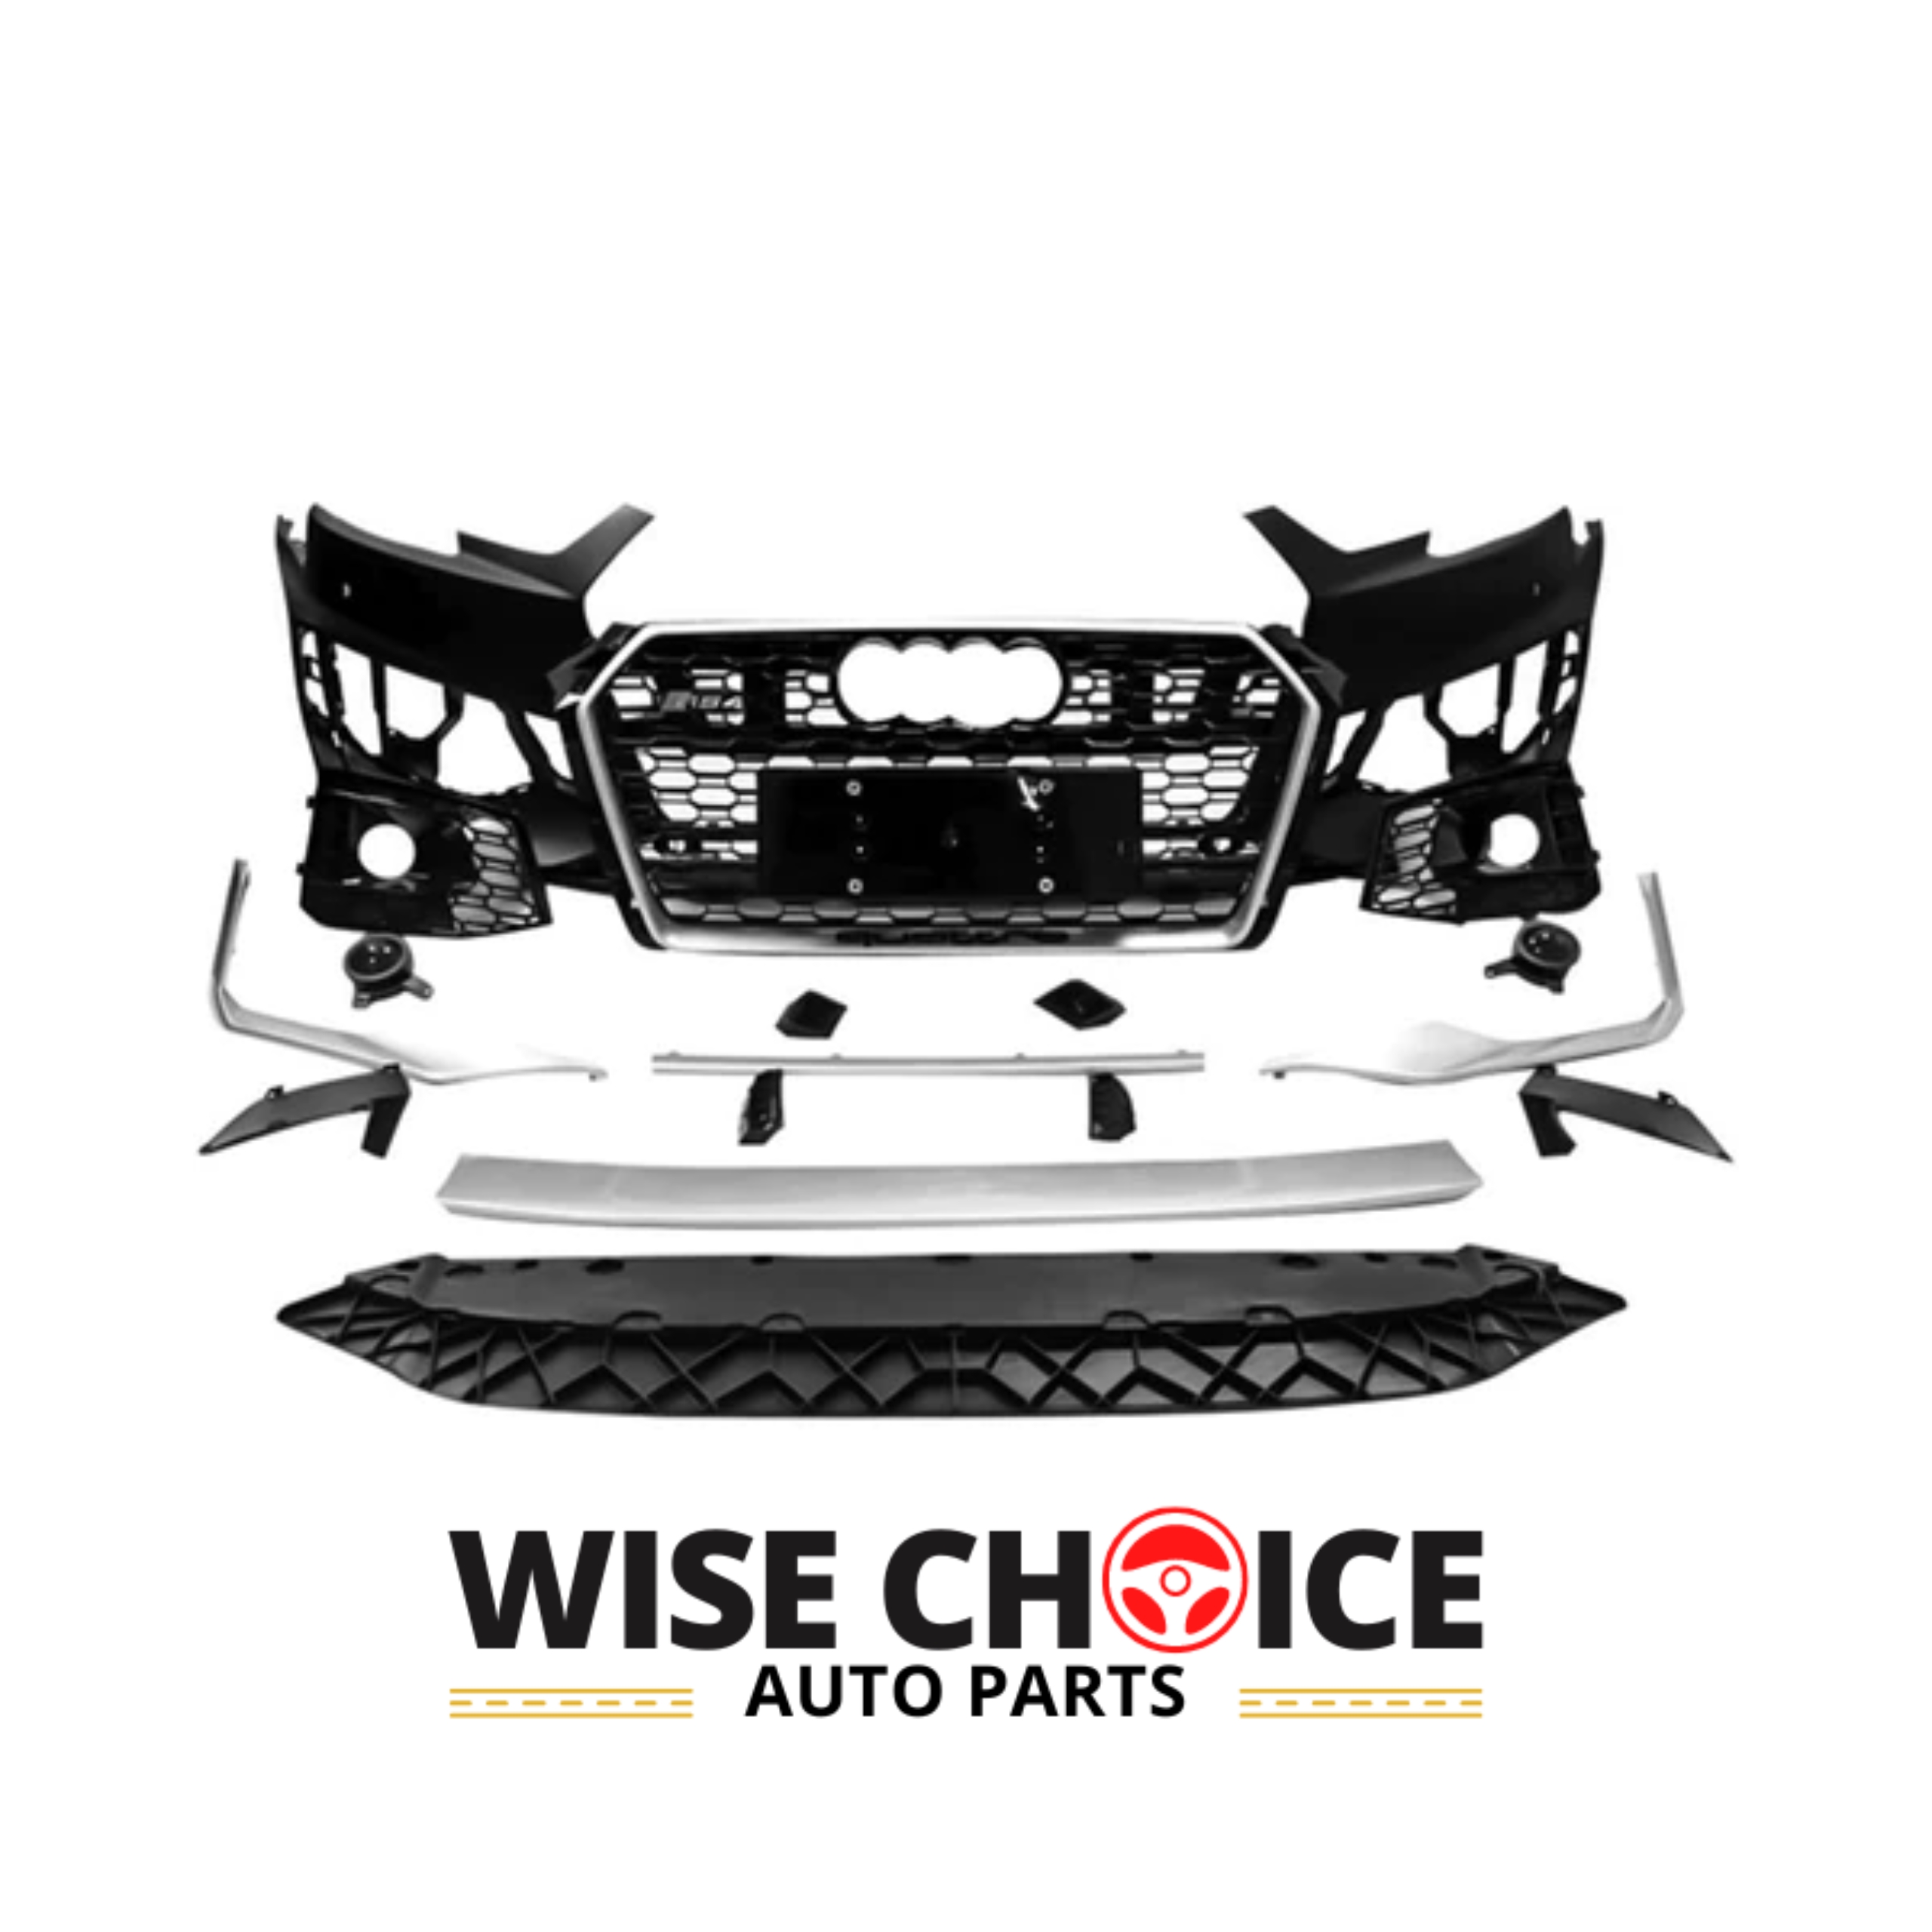 Audi RS4 Style Front Bumper Upgrade for 2017-2019 B9 A4/S4